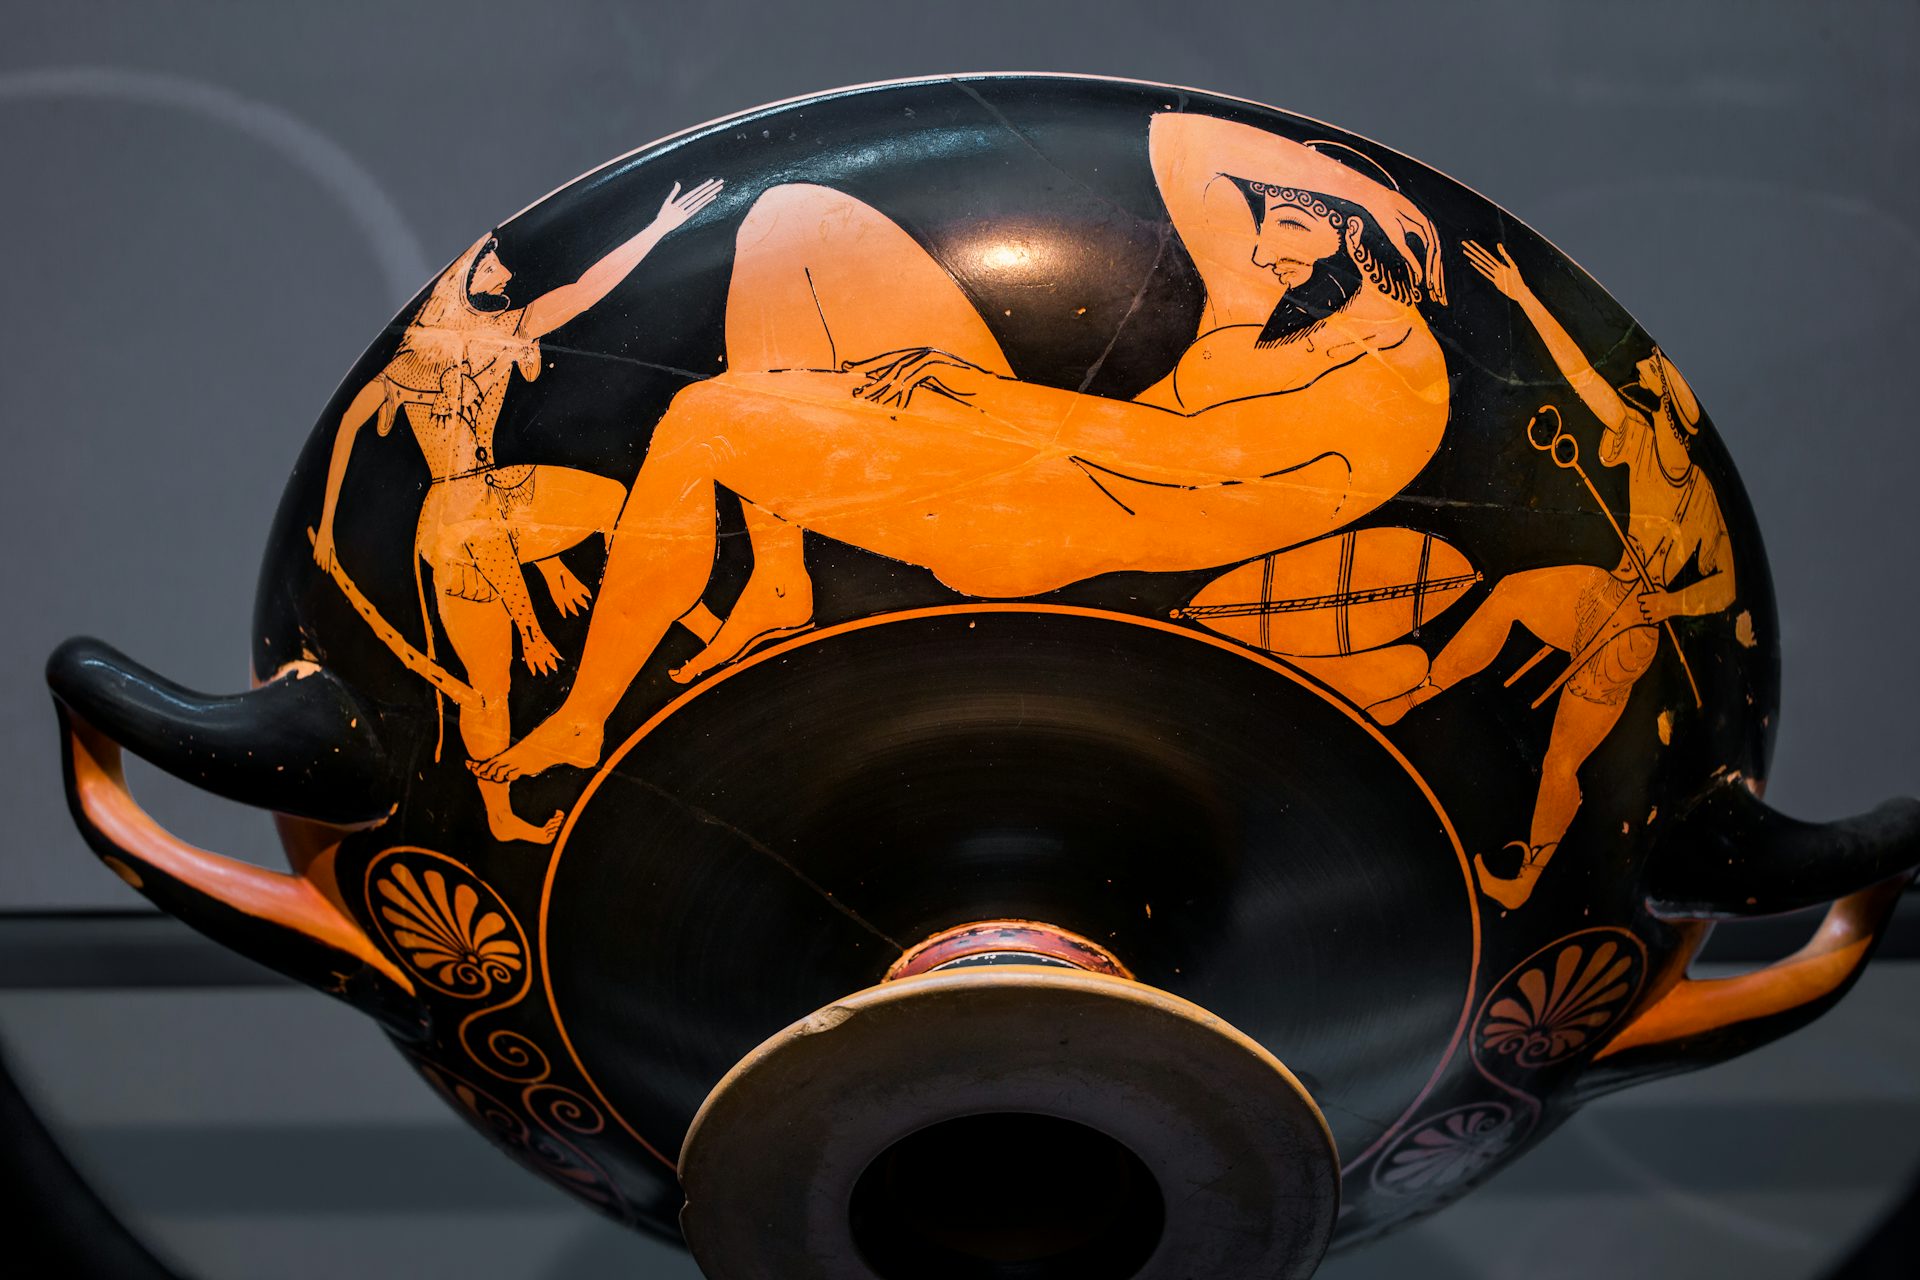 Heracles Alcyoneus Hermes attic red-figure kylix by Deiniades and Phintias, circa 520-500 BCE